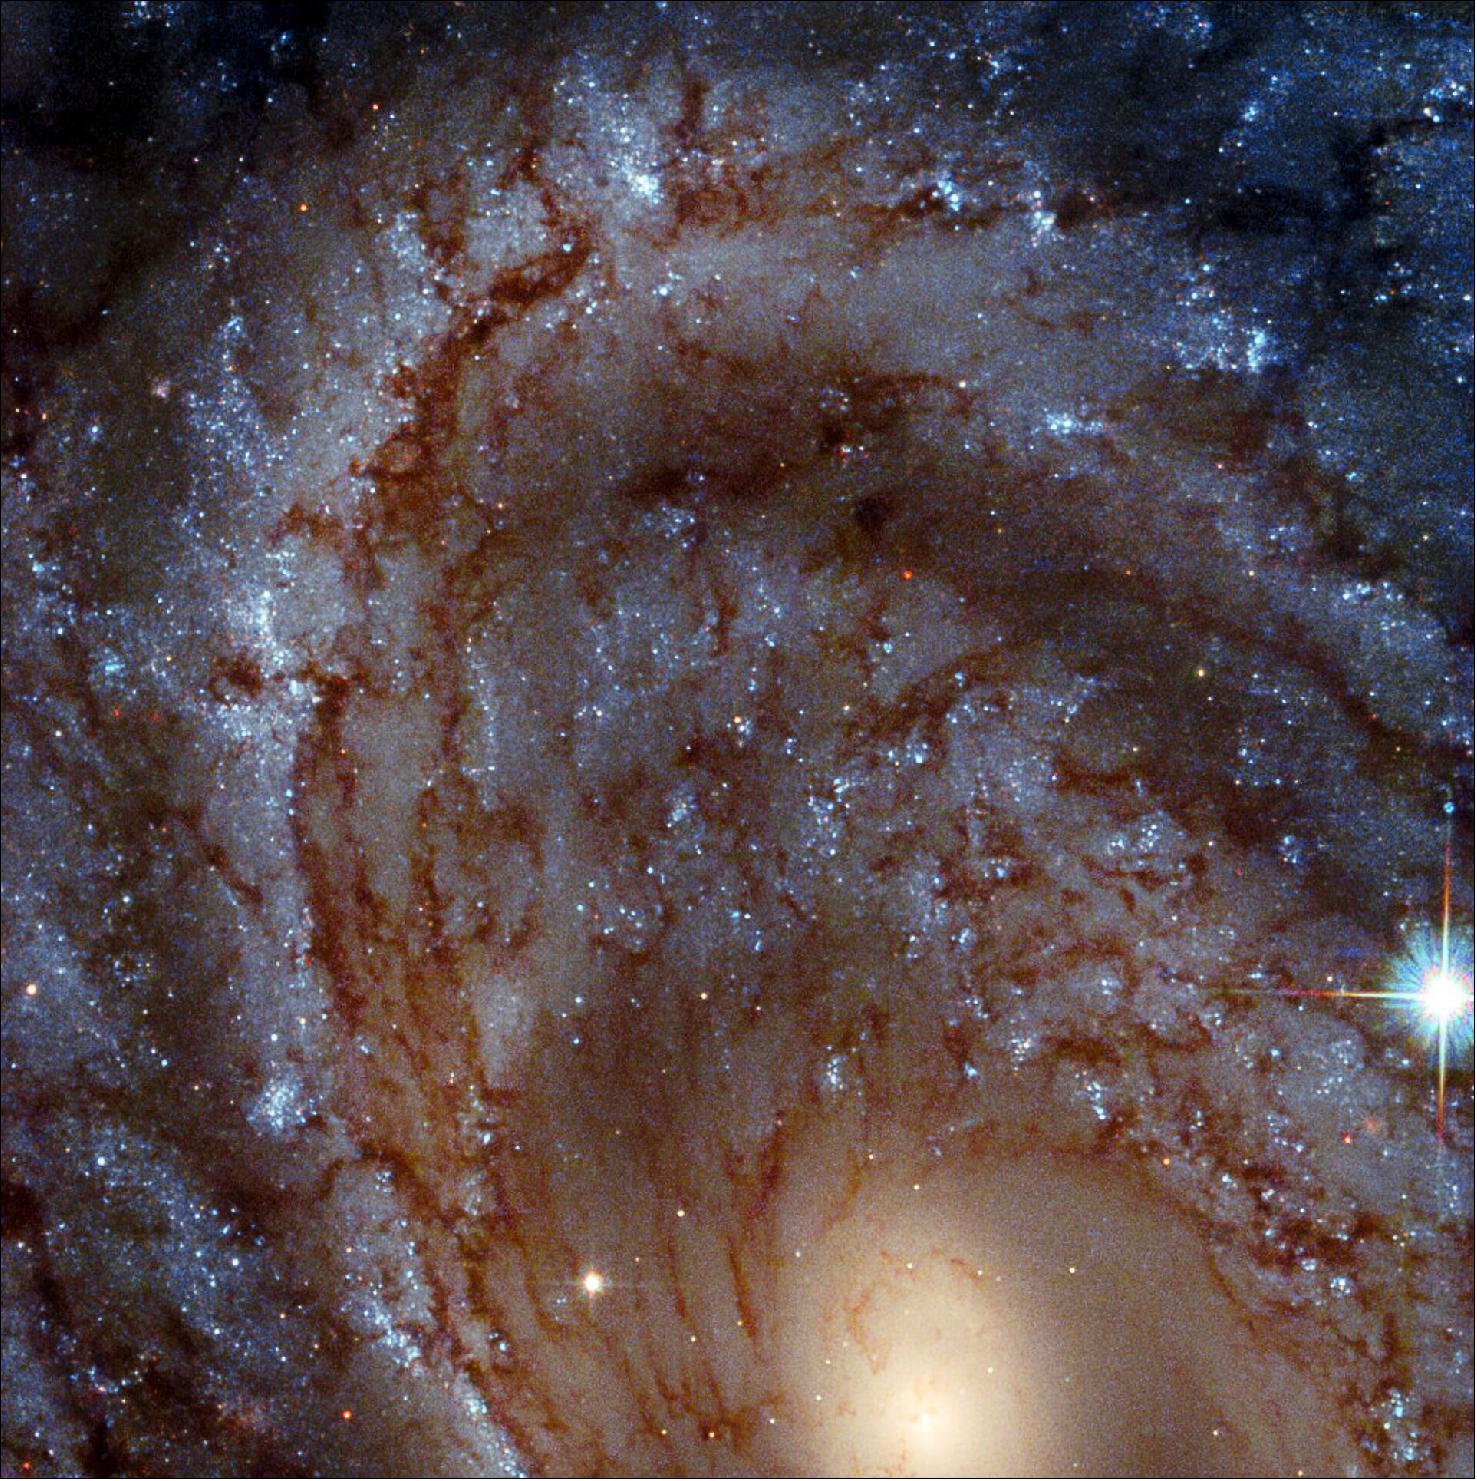 Figure 94: This galaxy is a familiar subject for Hubble. In the last years of the twentieth century, NGC 4063 was keenly and closely watched for signs of a peculiar class of stars known as Cepheid variables. These stars have a luminosity closely tied to the period with which they darken and brighten, allowing astronomers to accurately measure how far they are from Earth. Distance measurements from Cepheid variables are key to measuring the furthest distances in the Universe, and were one of the factors used by Georges Lemaître and Edwin Hubble to show that the Universe is expanding (image credit: ESA/Hubble & NASA, J. Maund; CC BY 4.0)